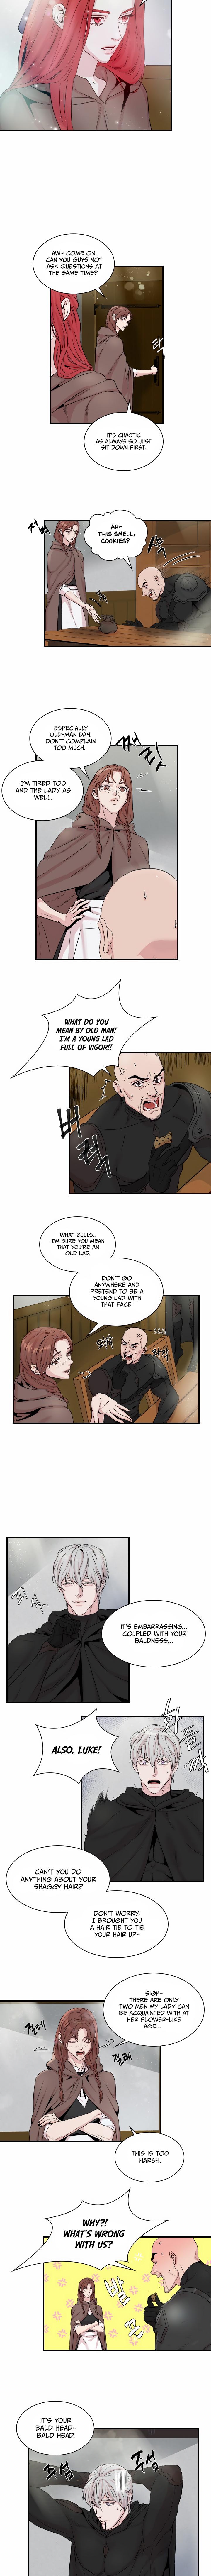 Aideen - Chapter 3 Page 3